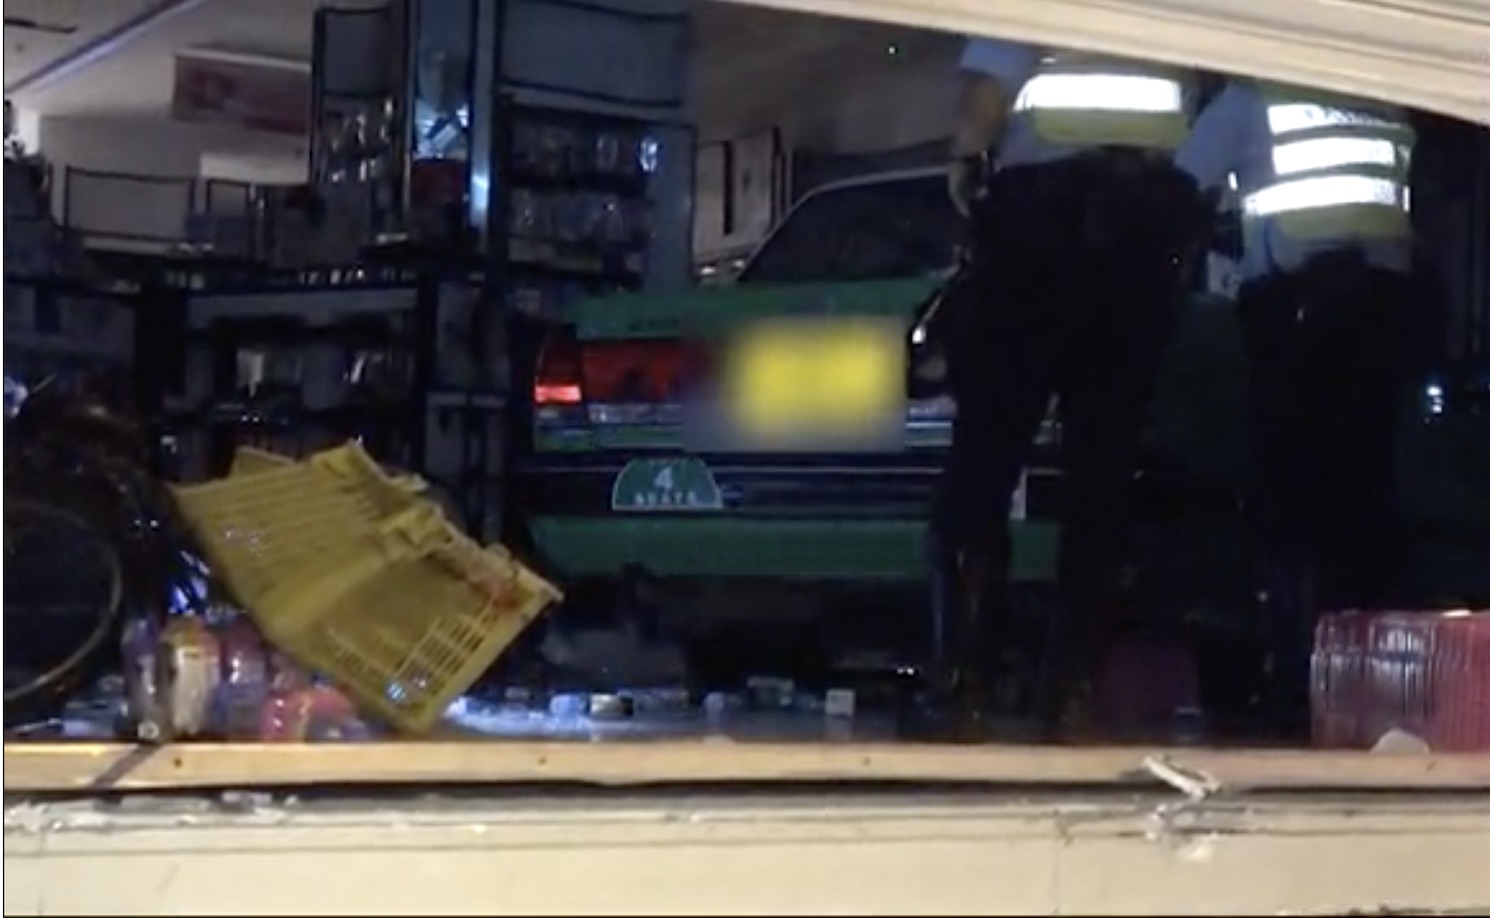 Police arrive at the scene of a Sasa comsmetics store in Sheung Shui where a cab rammed through the store front in the early hours of this morning. Screengrab via Apple Daily video.